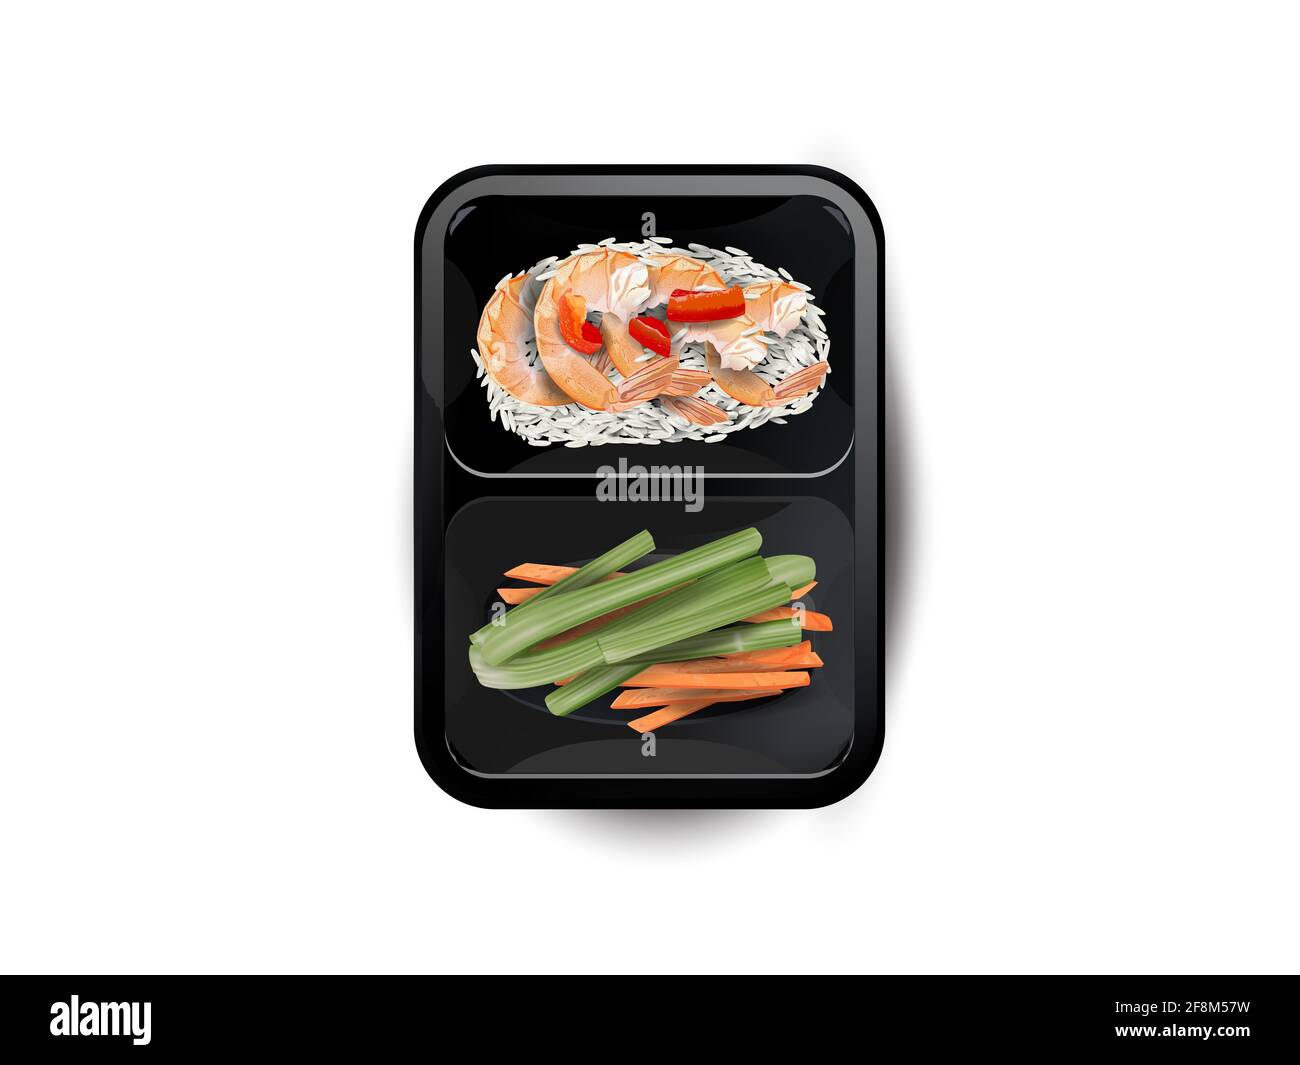 Shrimps with rice and vegetables in a lunchbox. Stock Photo